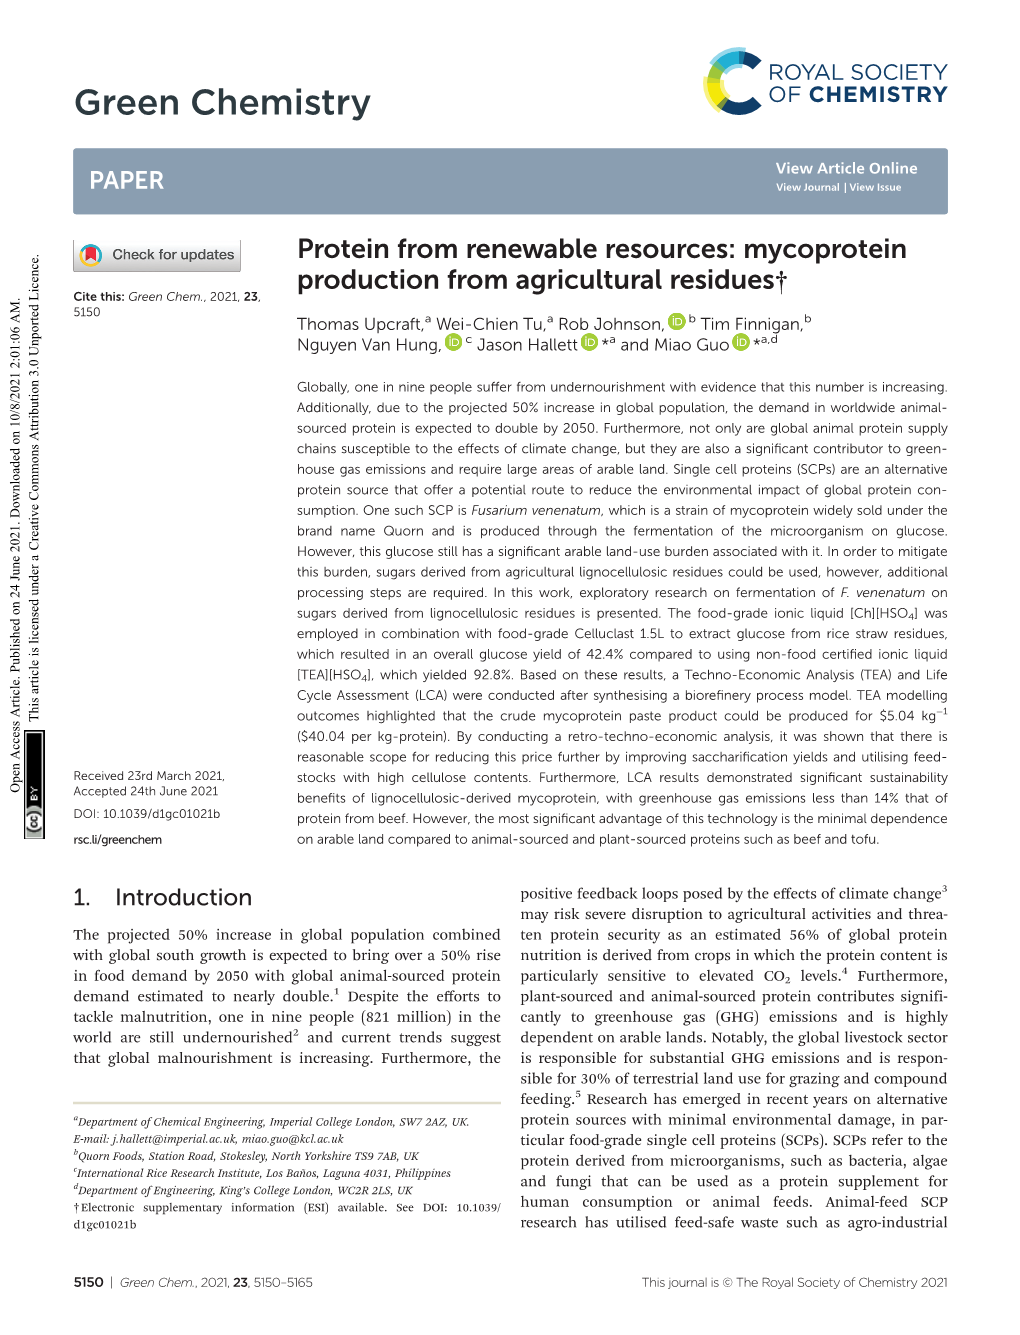 Protein from Renewable Resources: Mycoprotein Production From